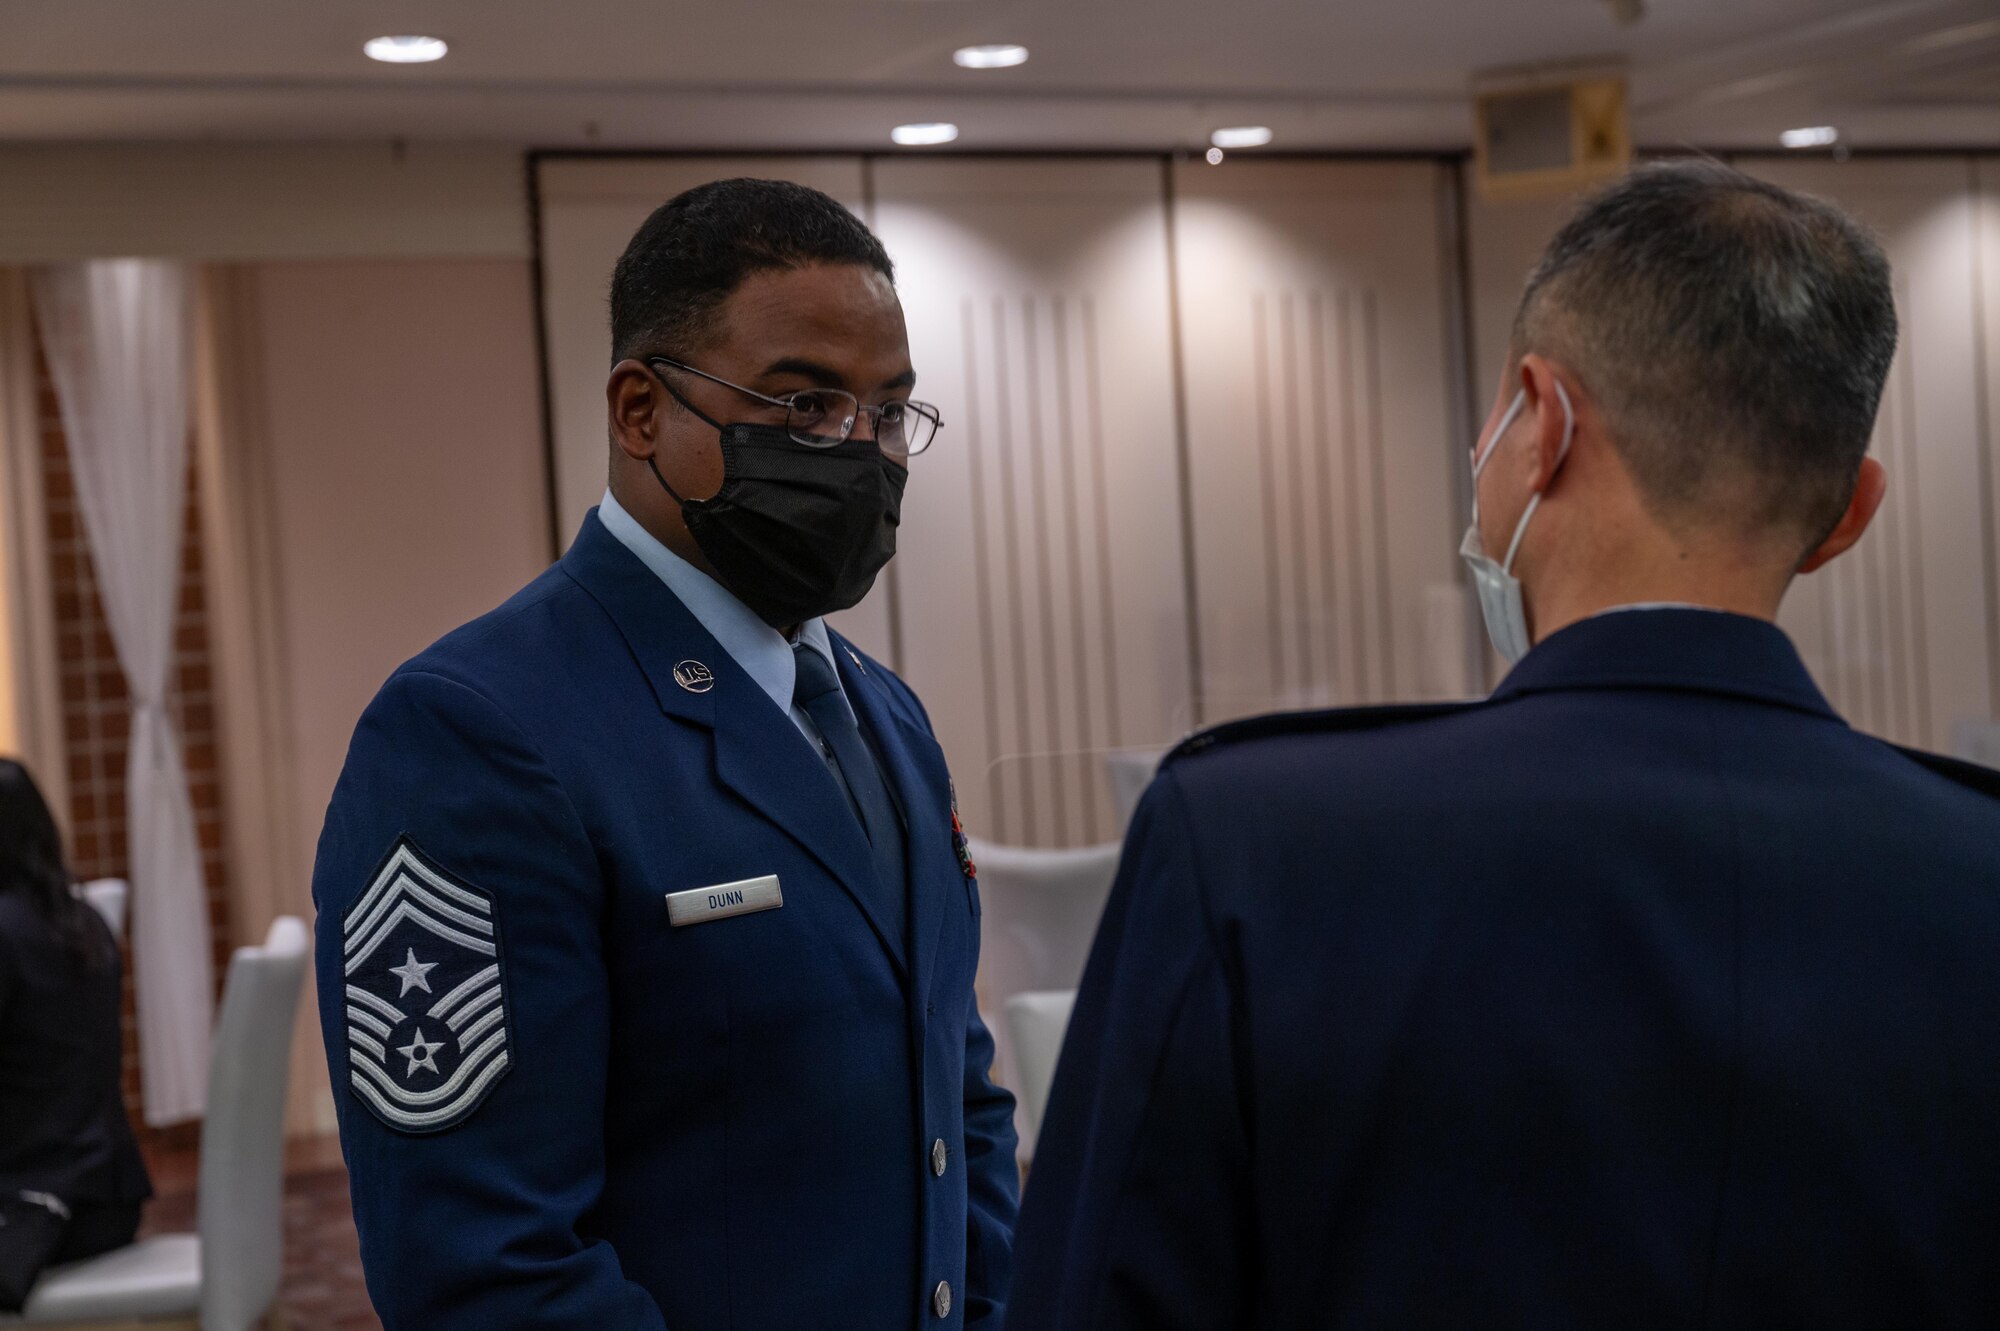 Chief Dunn speaks with a Japan Air Self Defense Force member.